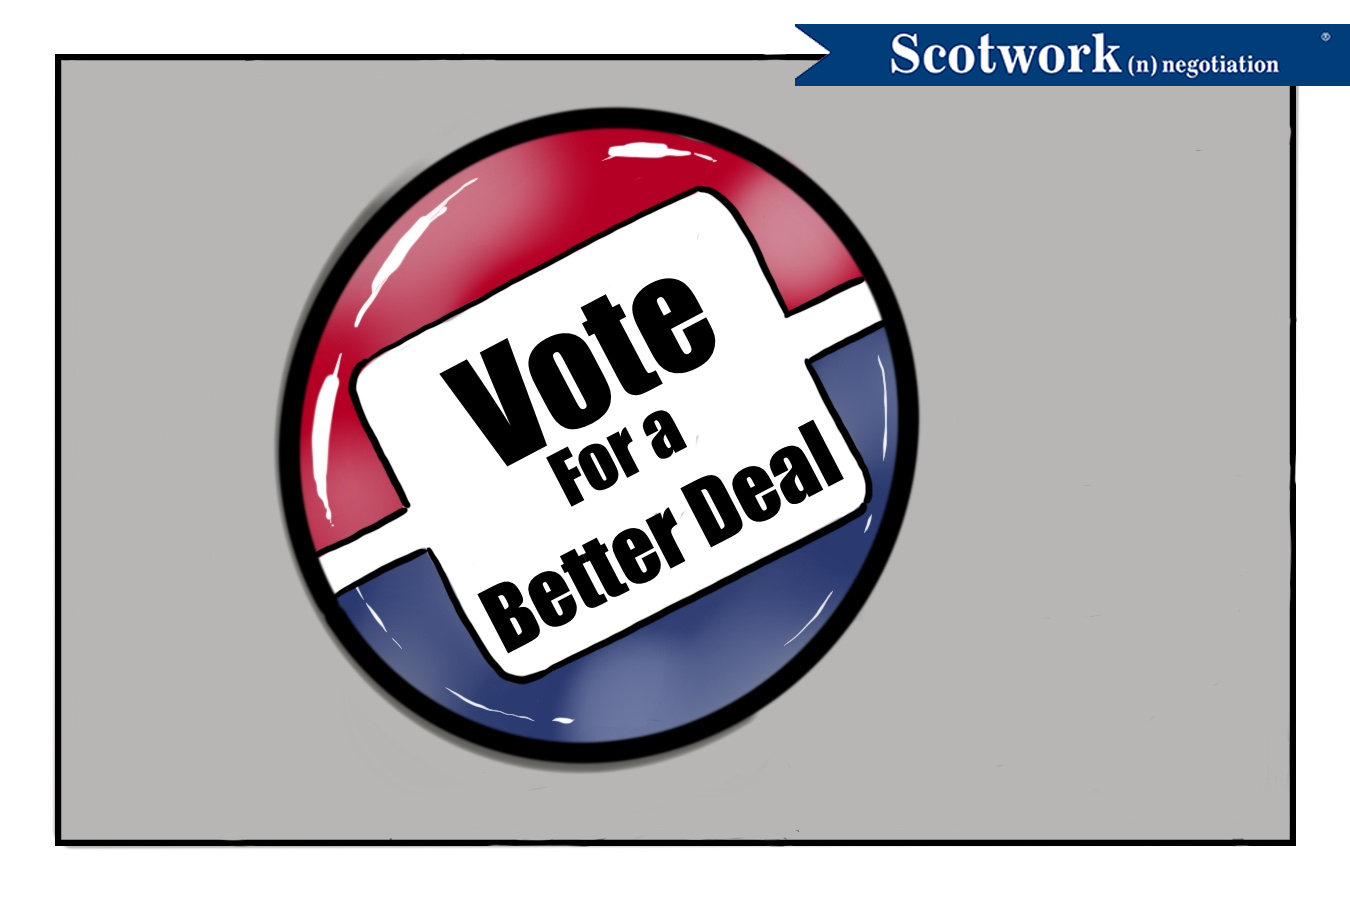 2020_11_02-vote-for-a-better-deal.jpg